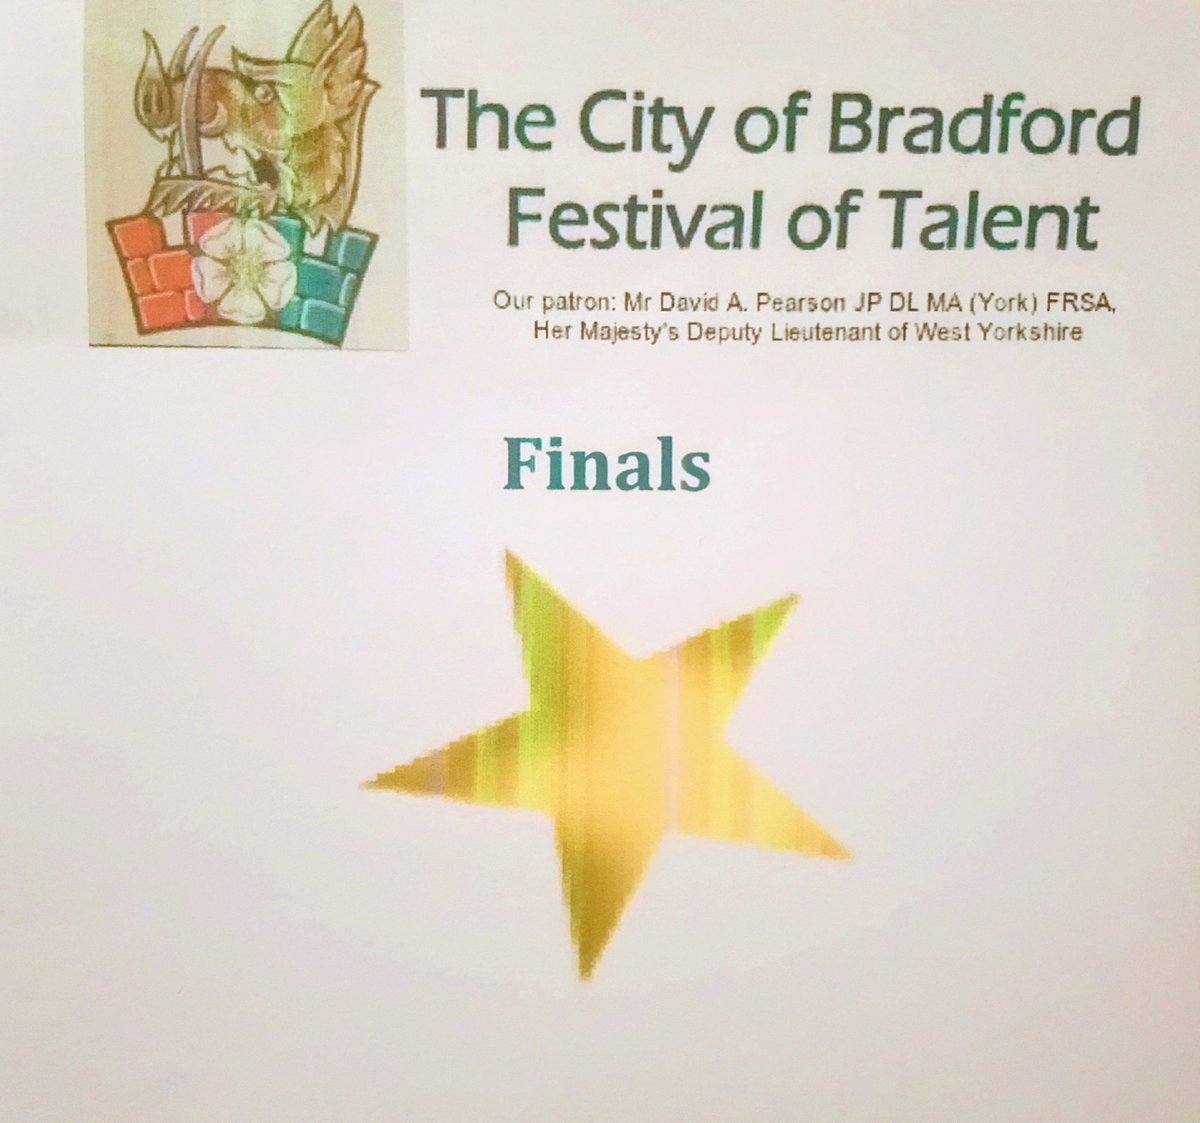 Lil man 👨 and junior school dance group opening the City of Bradford Festival of Talent with the Lord Mayor #bradfordhotel @LordMayorBD #Bradford